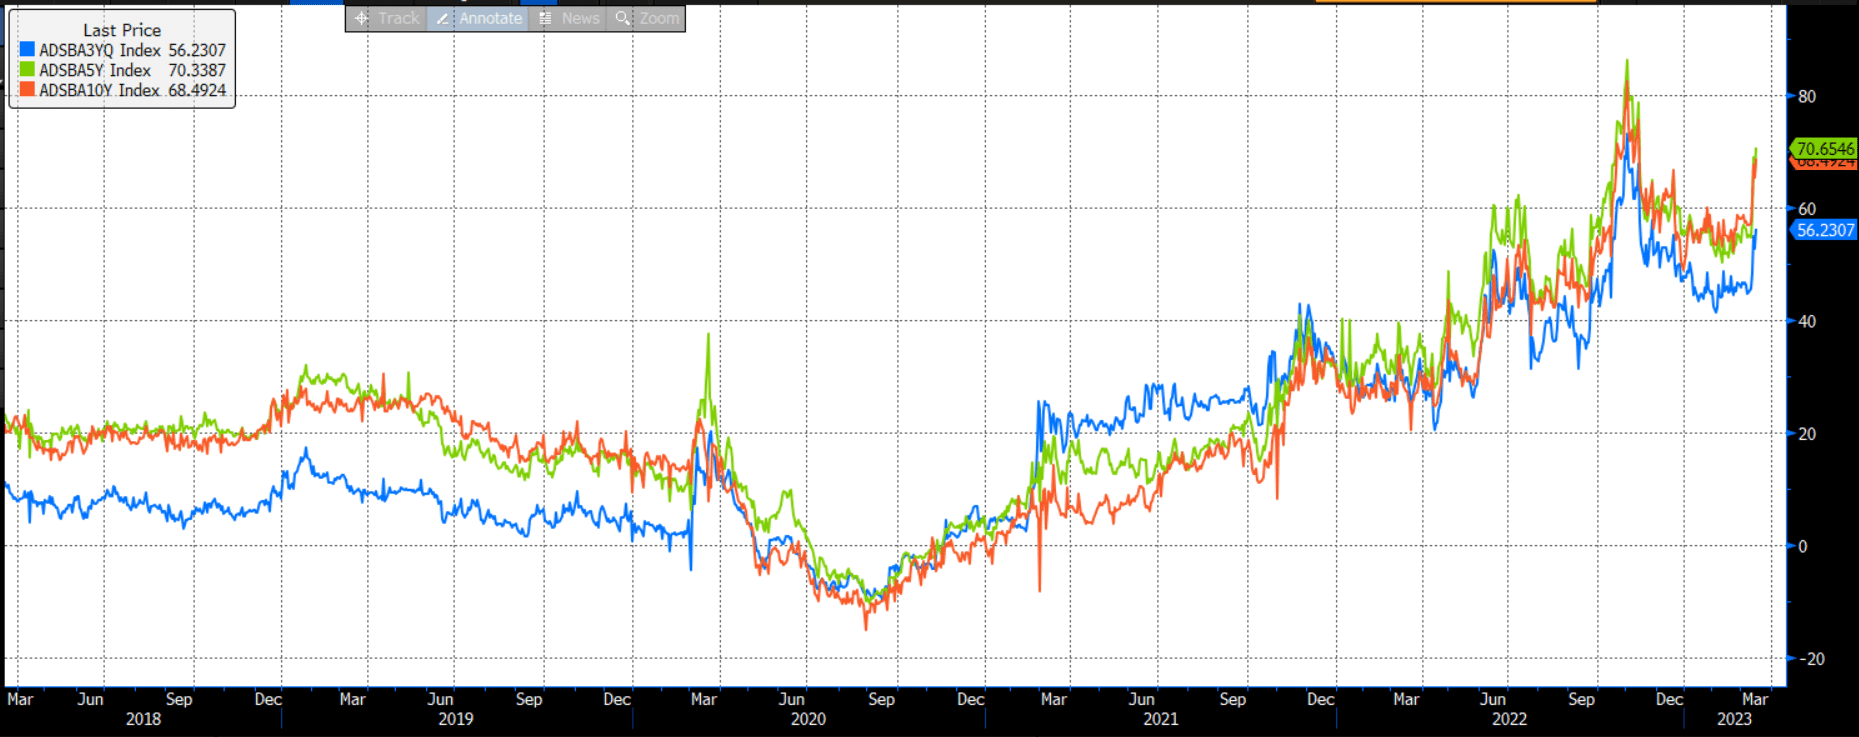 Source: Bloomberg. Blue line – 3yr bond-swap spread, Green line – 5yr bond-swap spread, Orange line – 10yr bond-swap spread. Y-axis units in basis points, as at 16/03/2023.